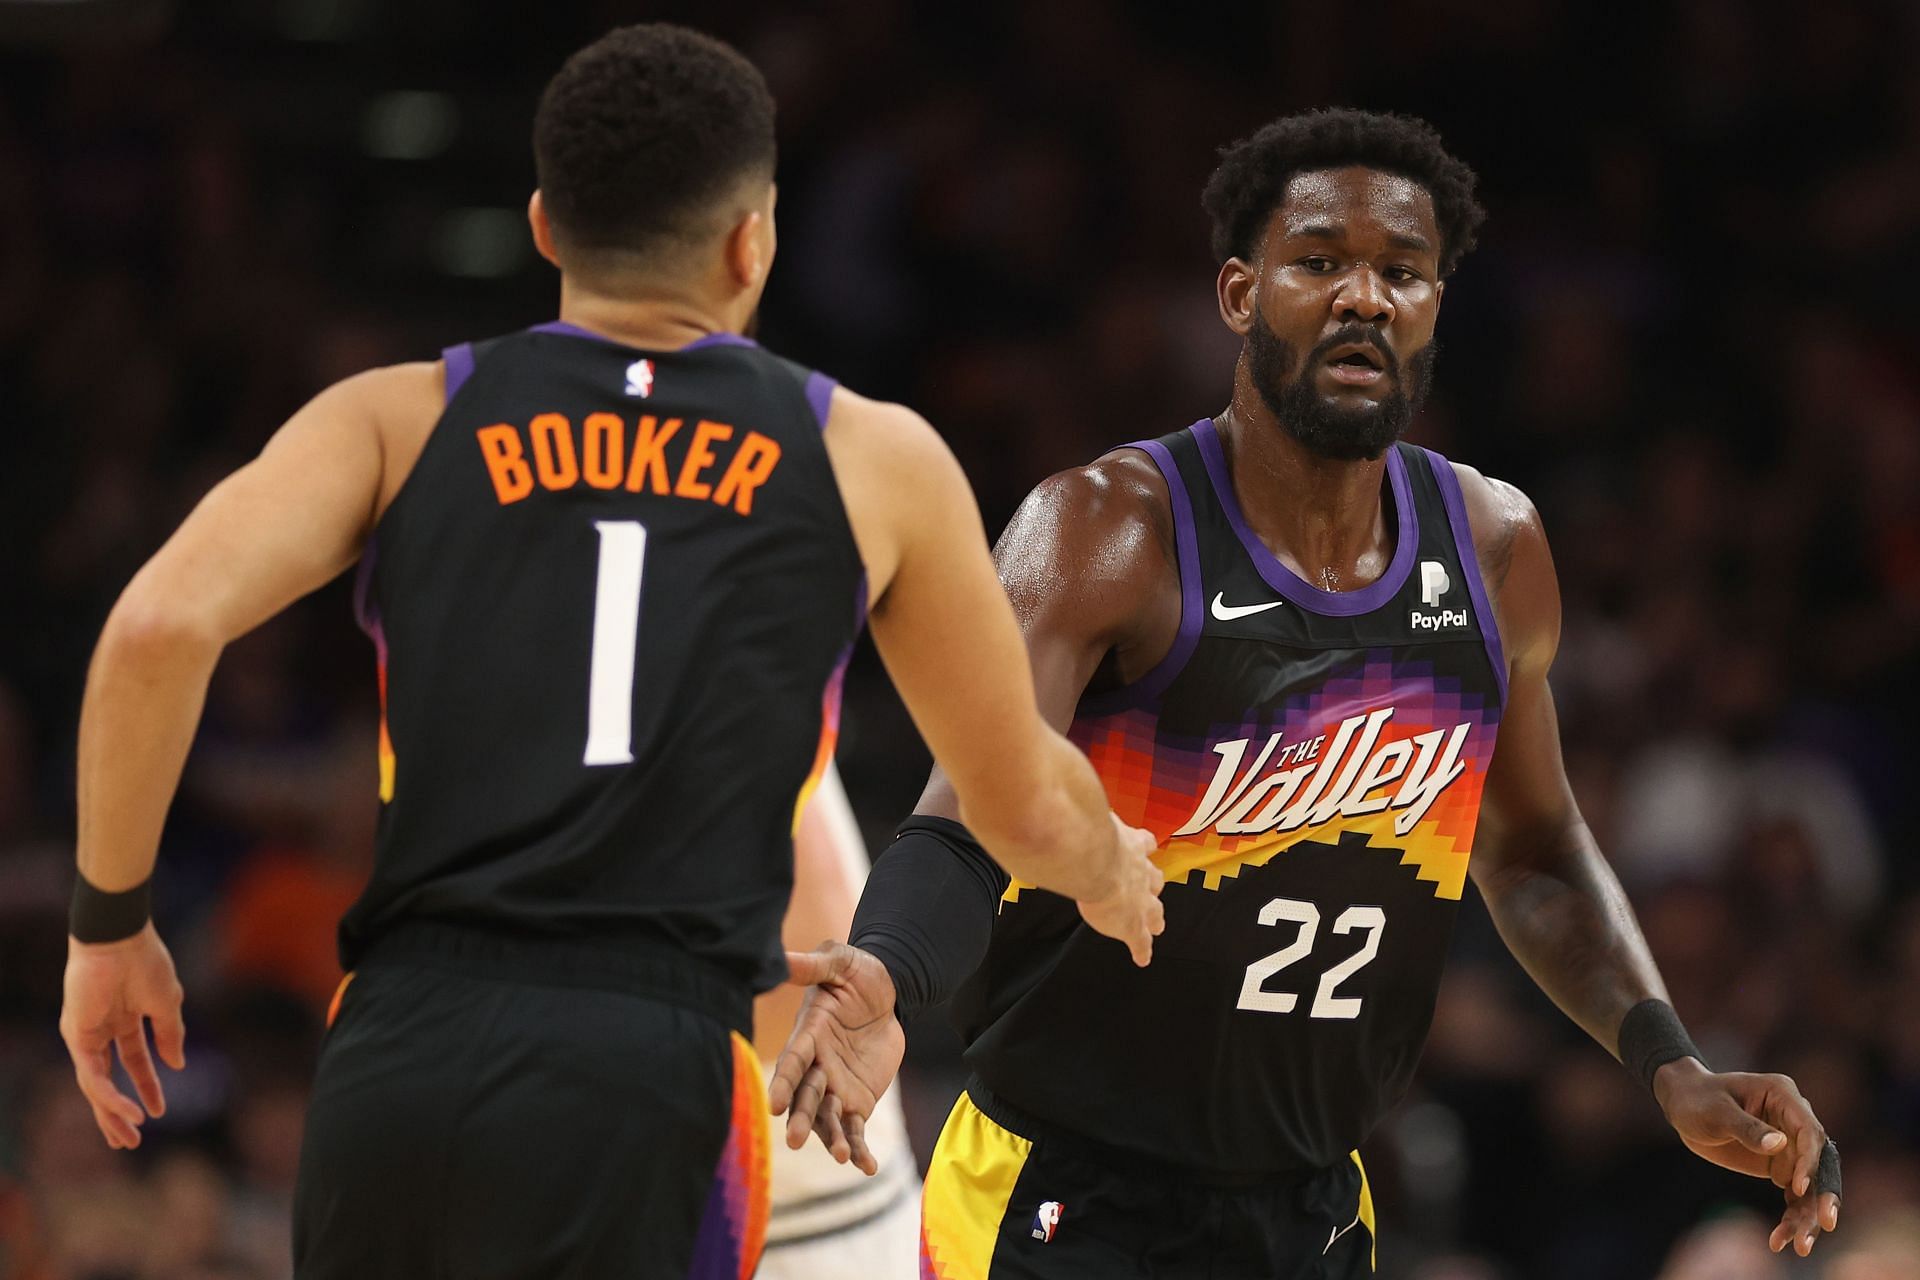 Devin Booker and Deandre Ayton (right) of the Phoenix Suns against the Denver Nuggets